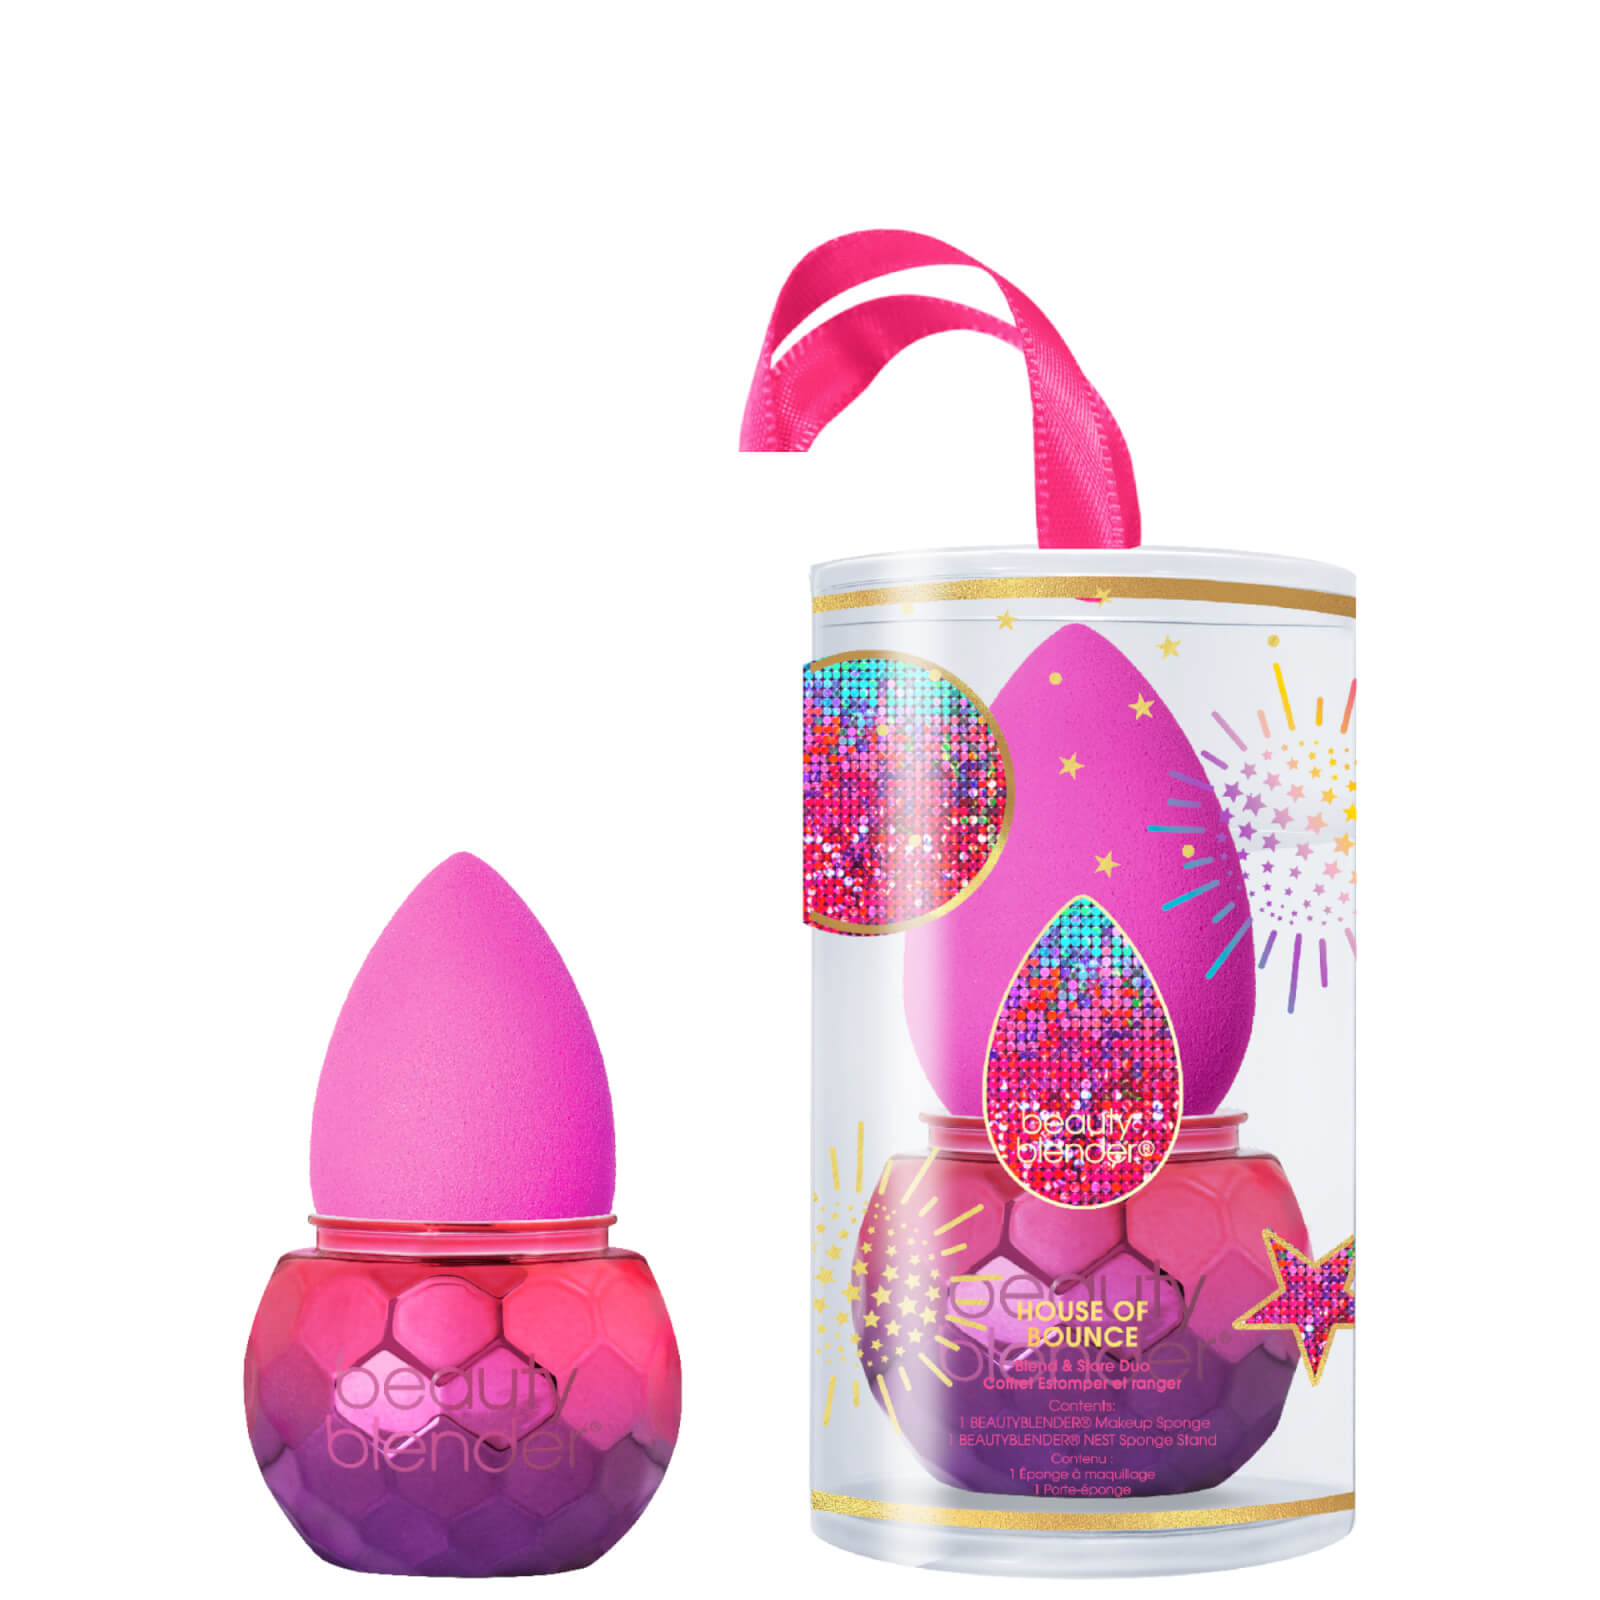 BeautyBlender House of Bounce (Worth £39.00)